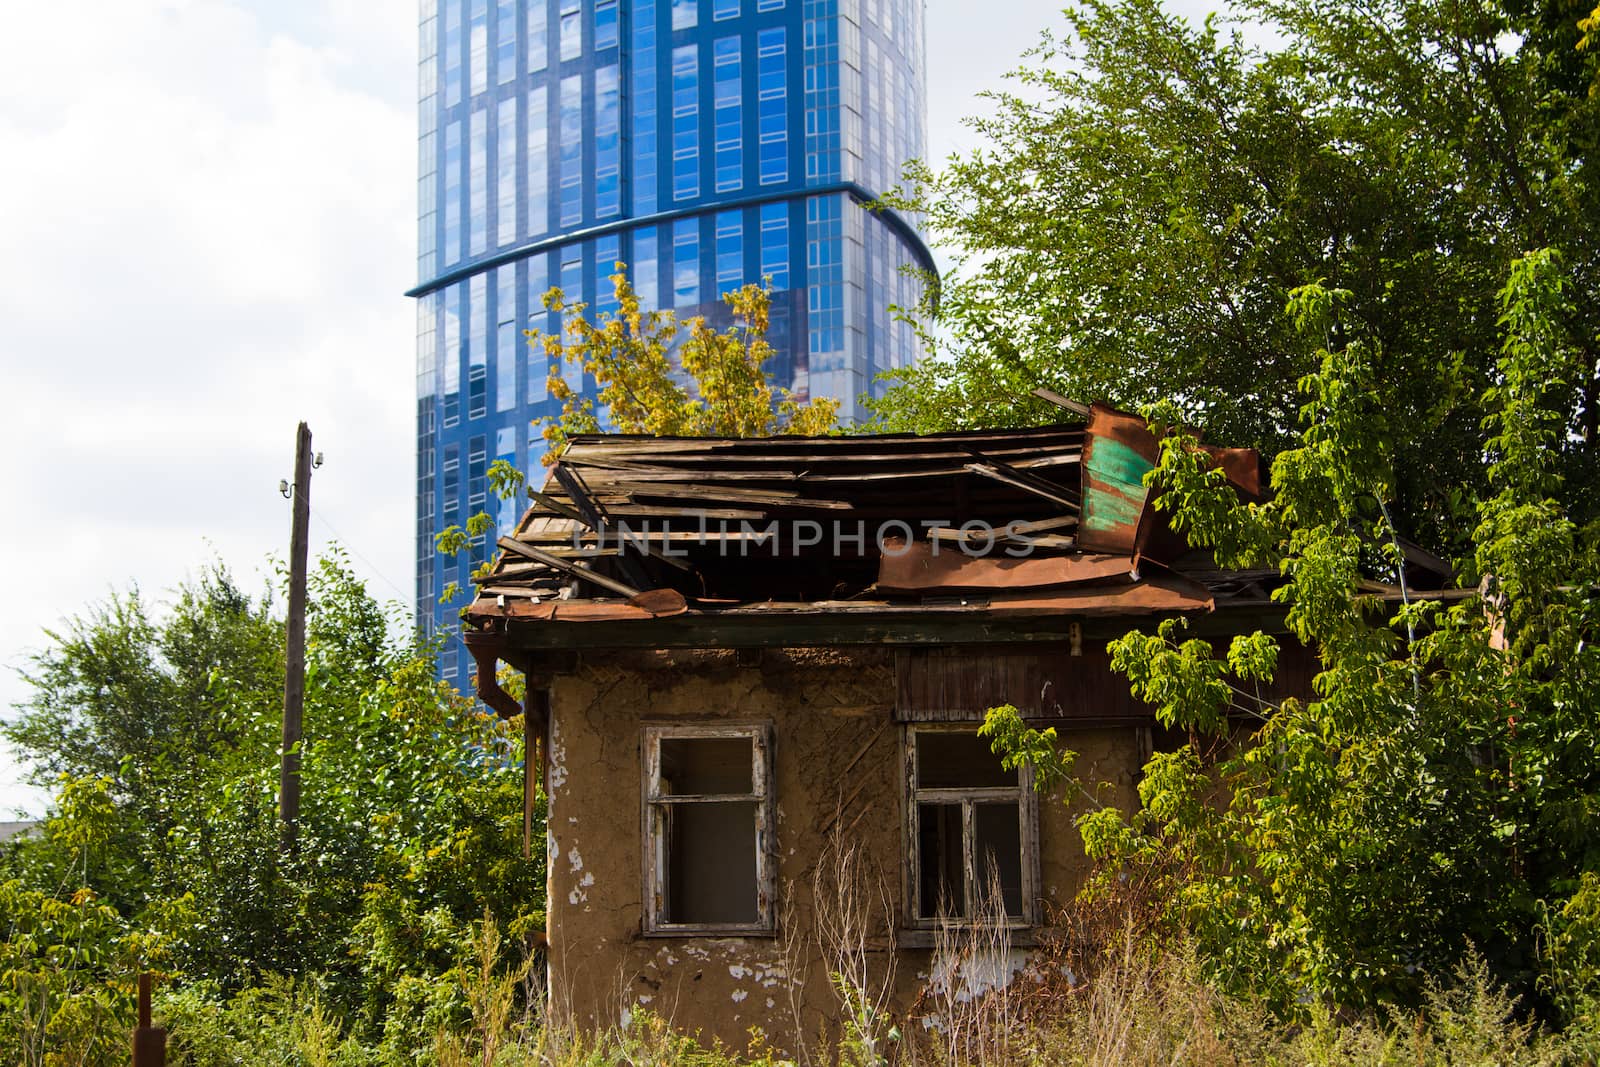 Old building in front of a modern skyscraper - Stock Image